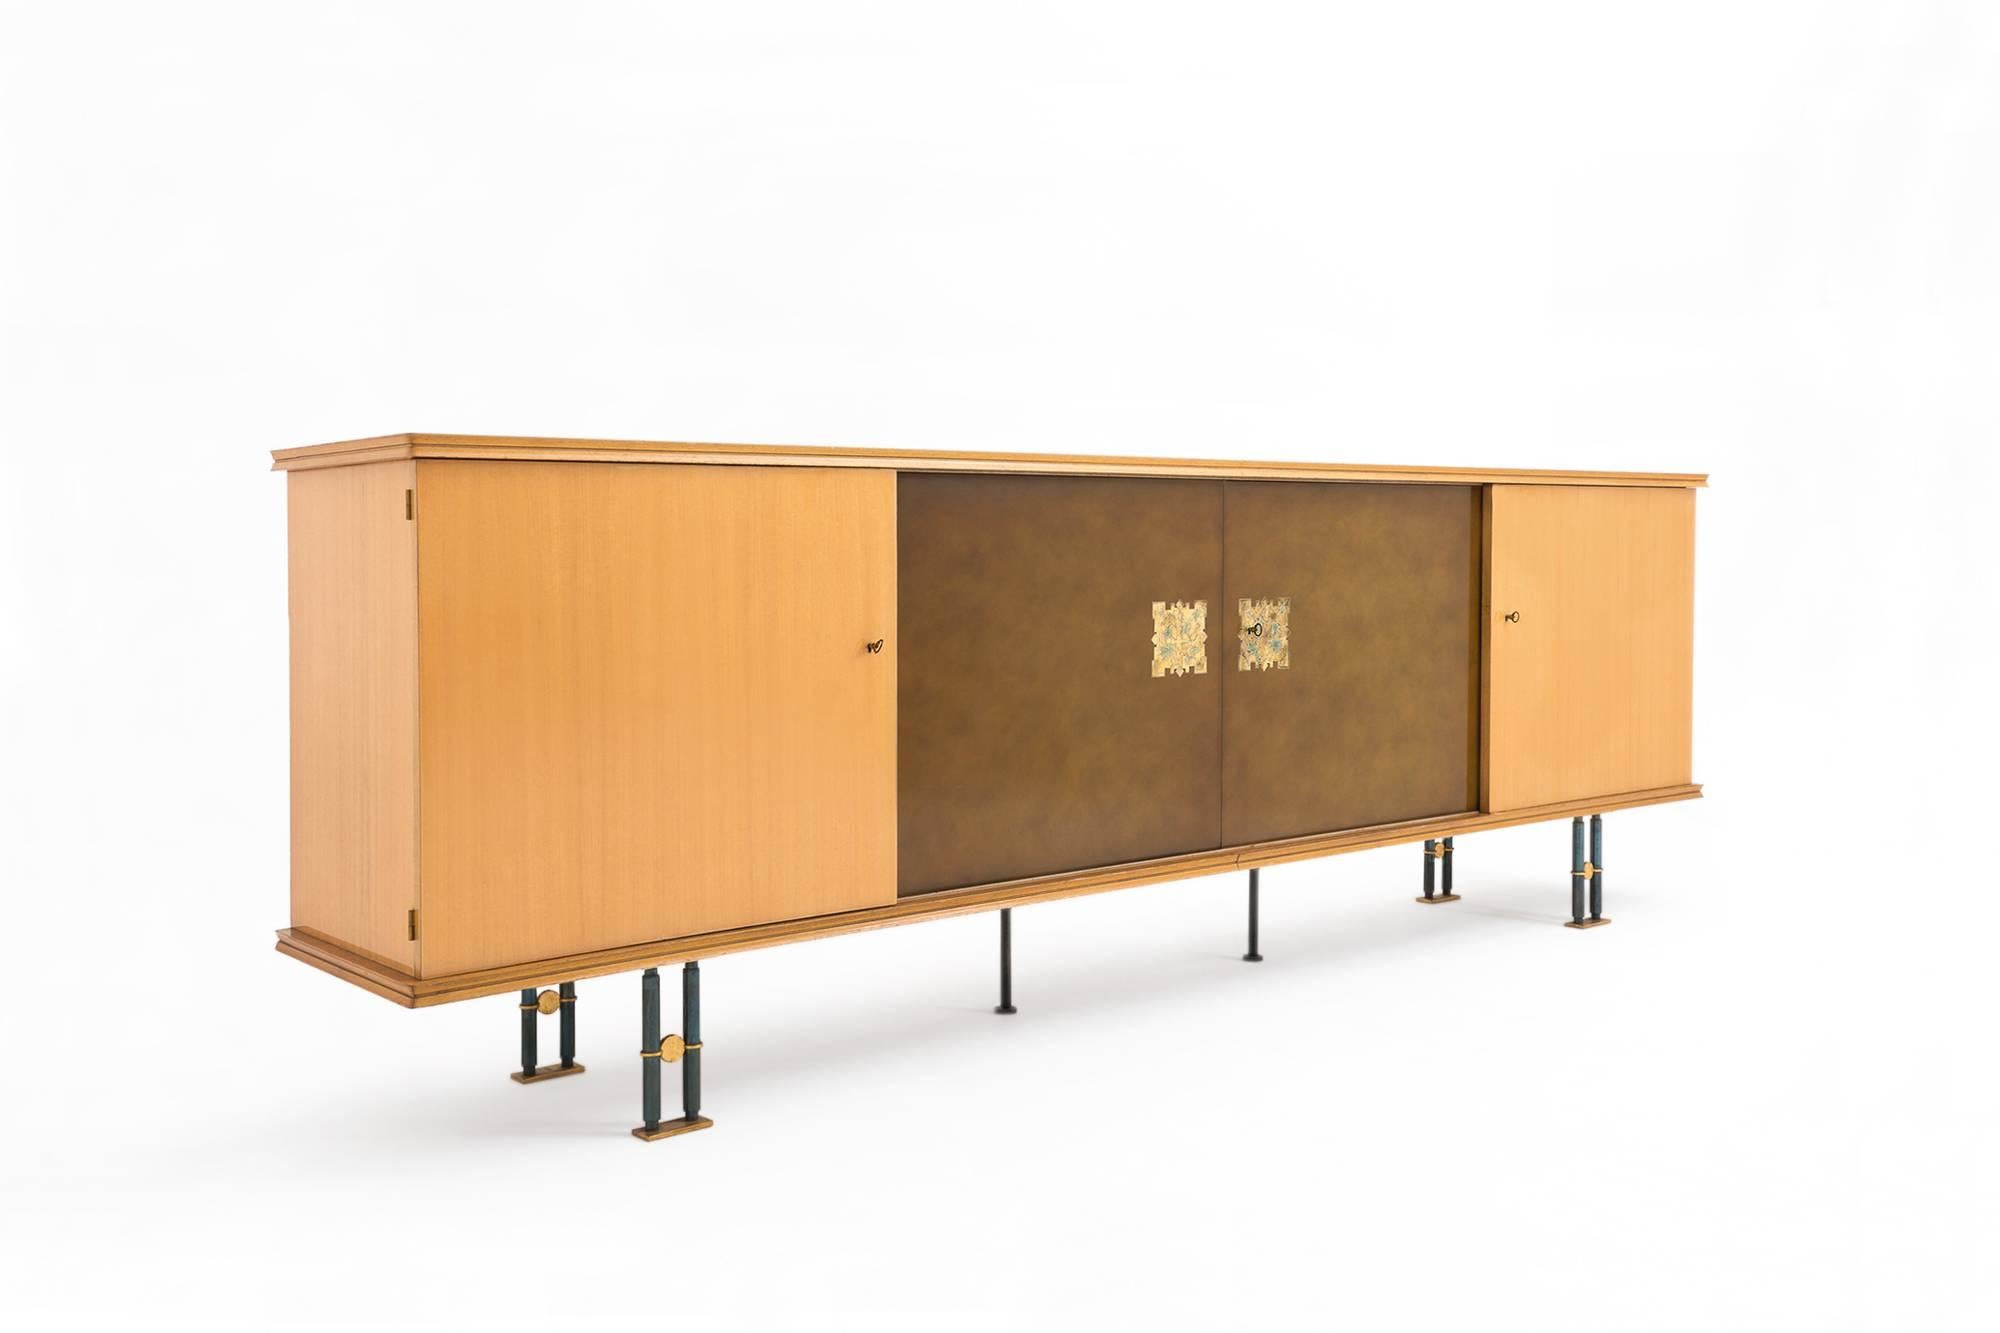 Outstanding sideboard by Jules Leleu, Paris, 1950s. Whole made from high quality Maple veneer, the two middle artistic lacquered doors are made by Paul Etienne Sain and Henri Tambute and have wonderful small drawings in gild and azure. The cabinet